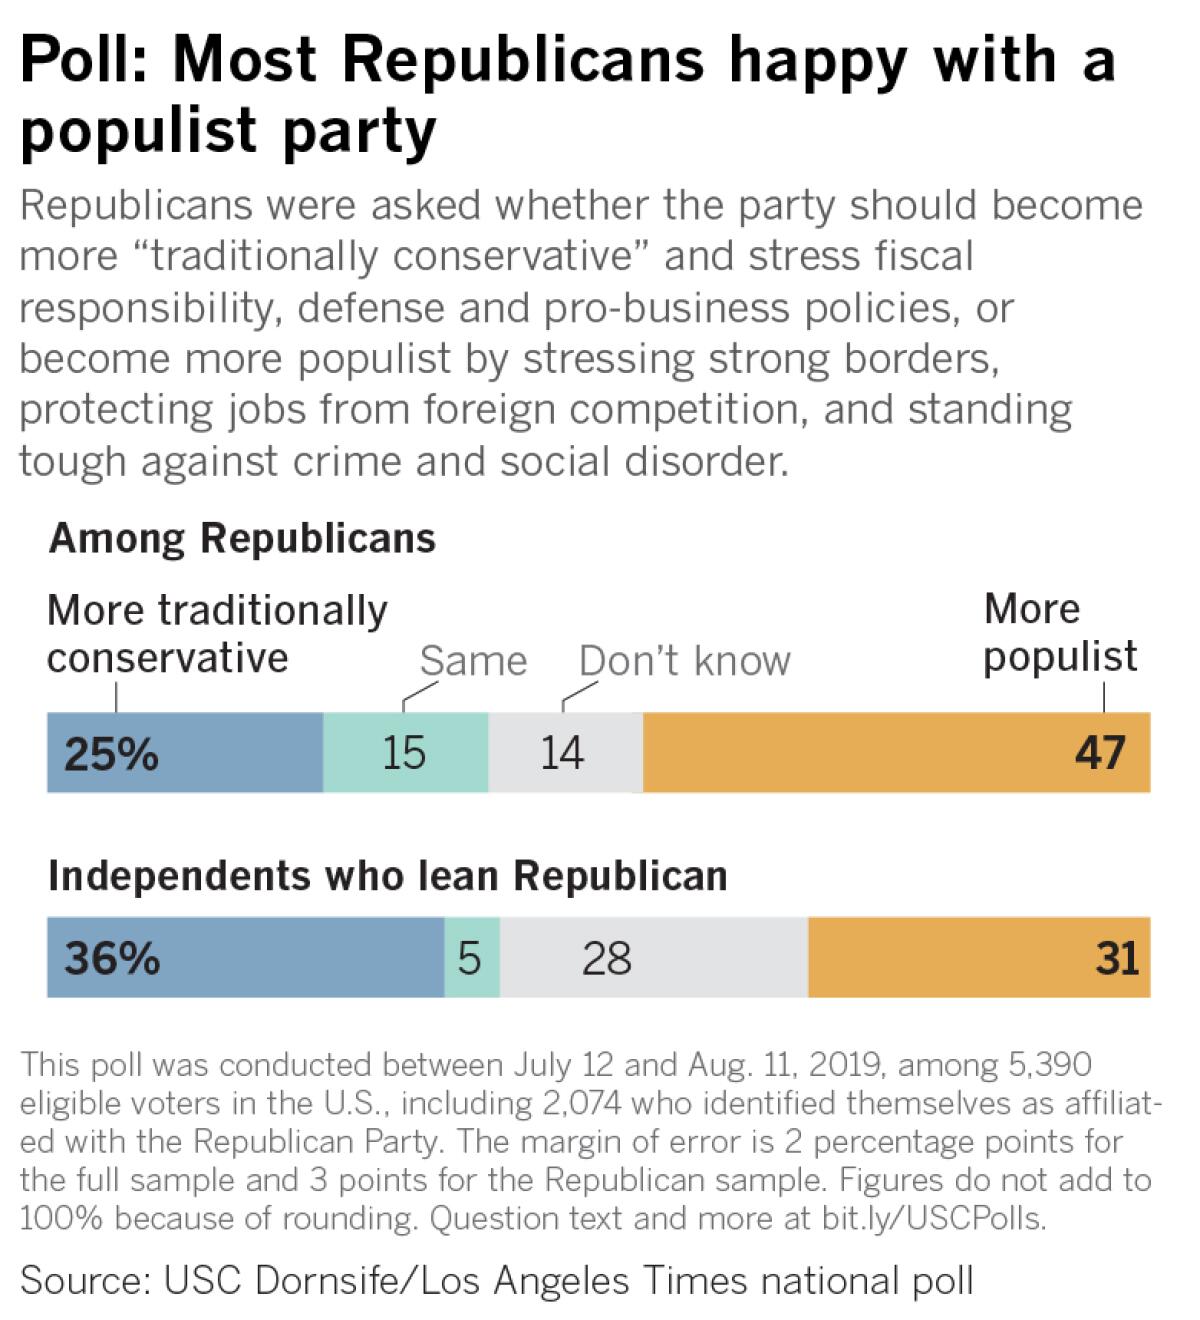 Republicans were asked whether the party should become more “traditionally conservative” and stress fiscal responsibility, defense and pro-business policies, or become more populist by stressing strong borders, protecting jobs from foreign competition, and standing tough against crime and social disorder.